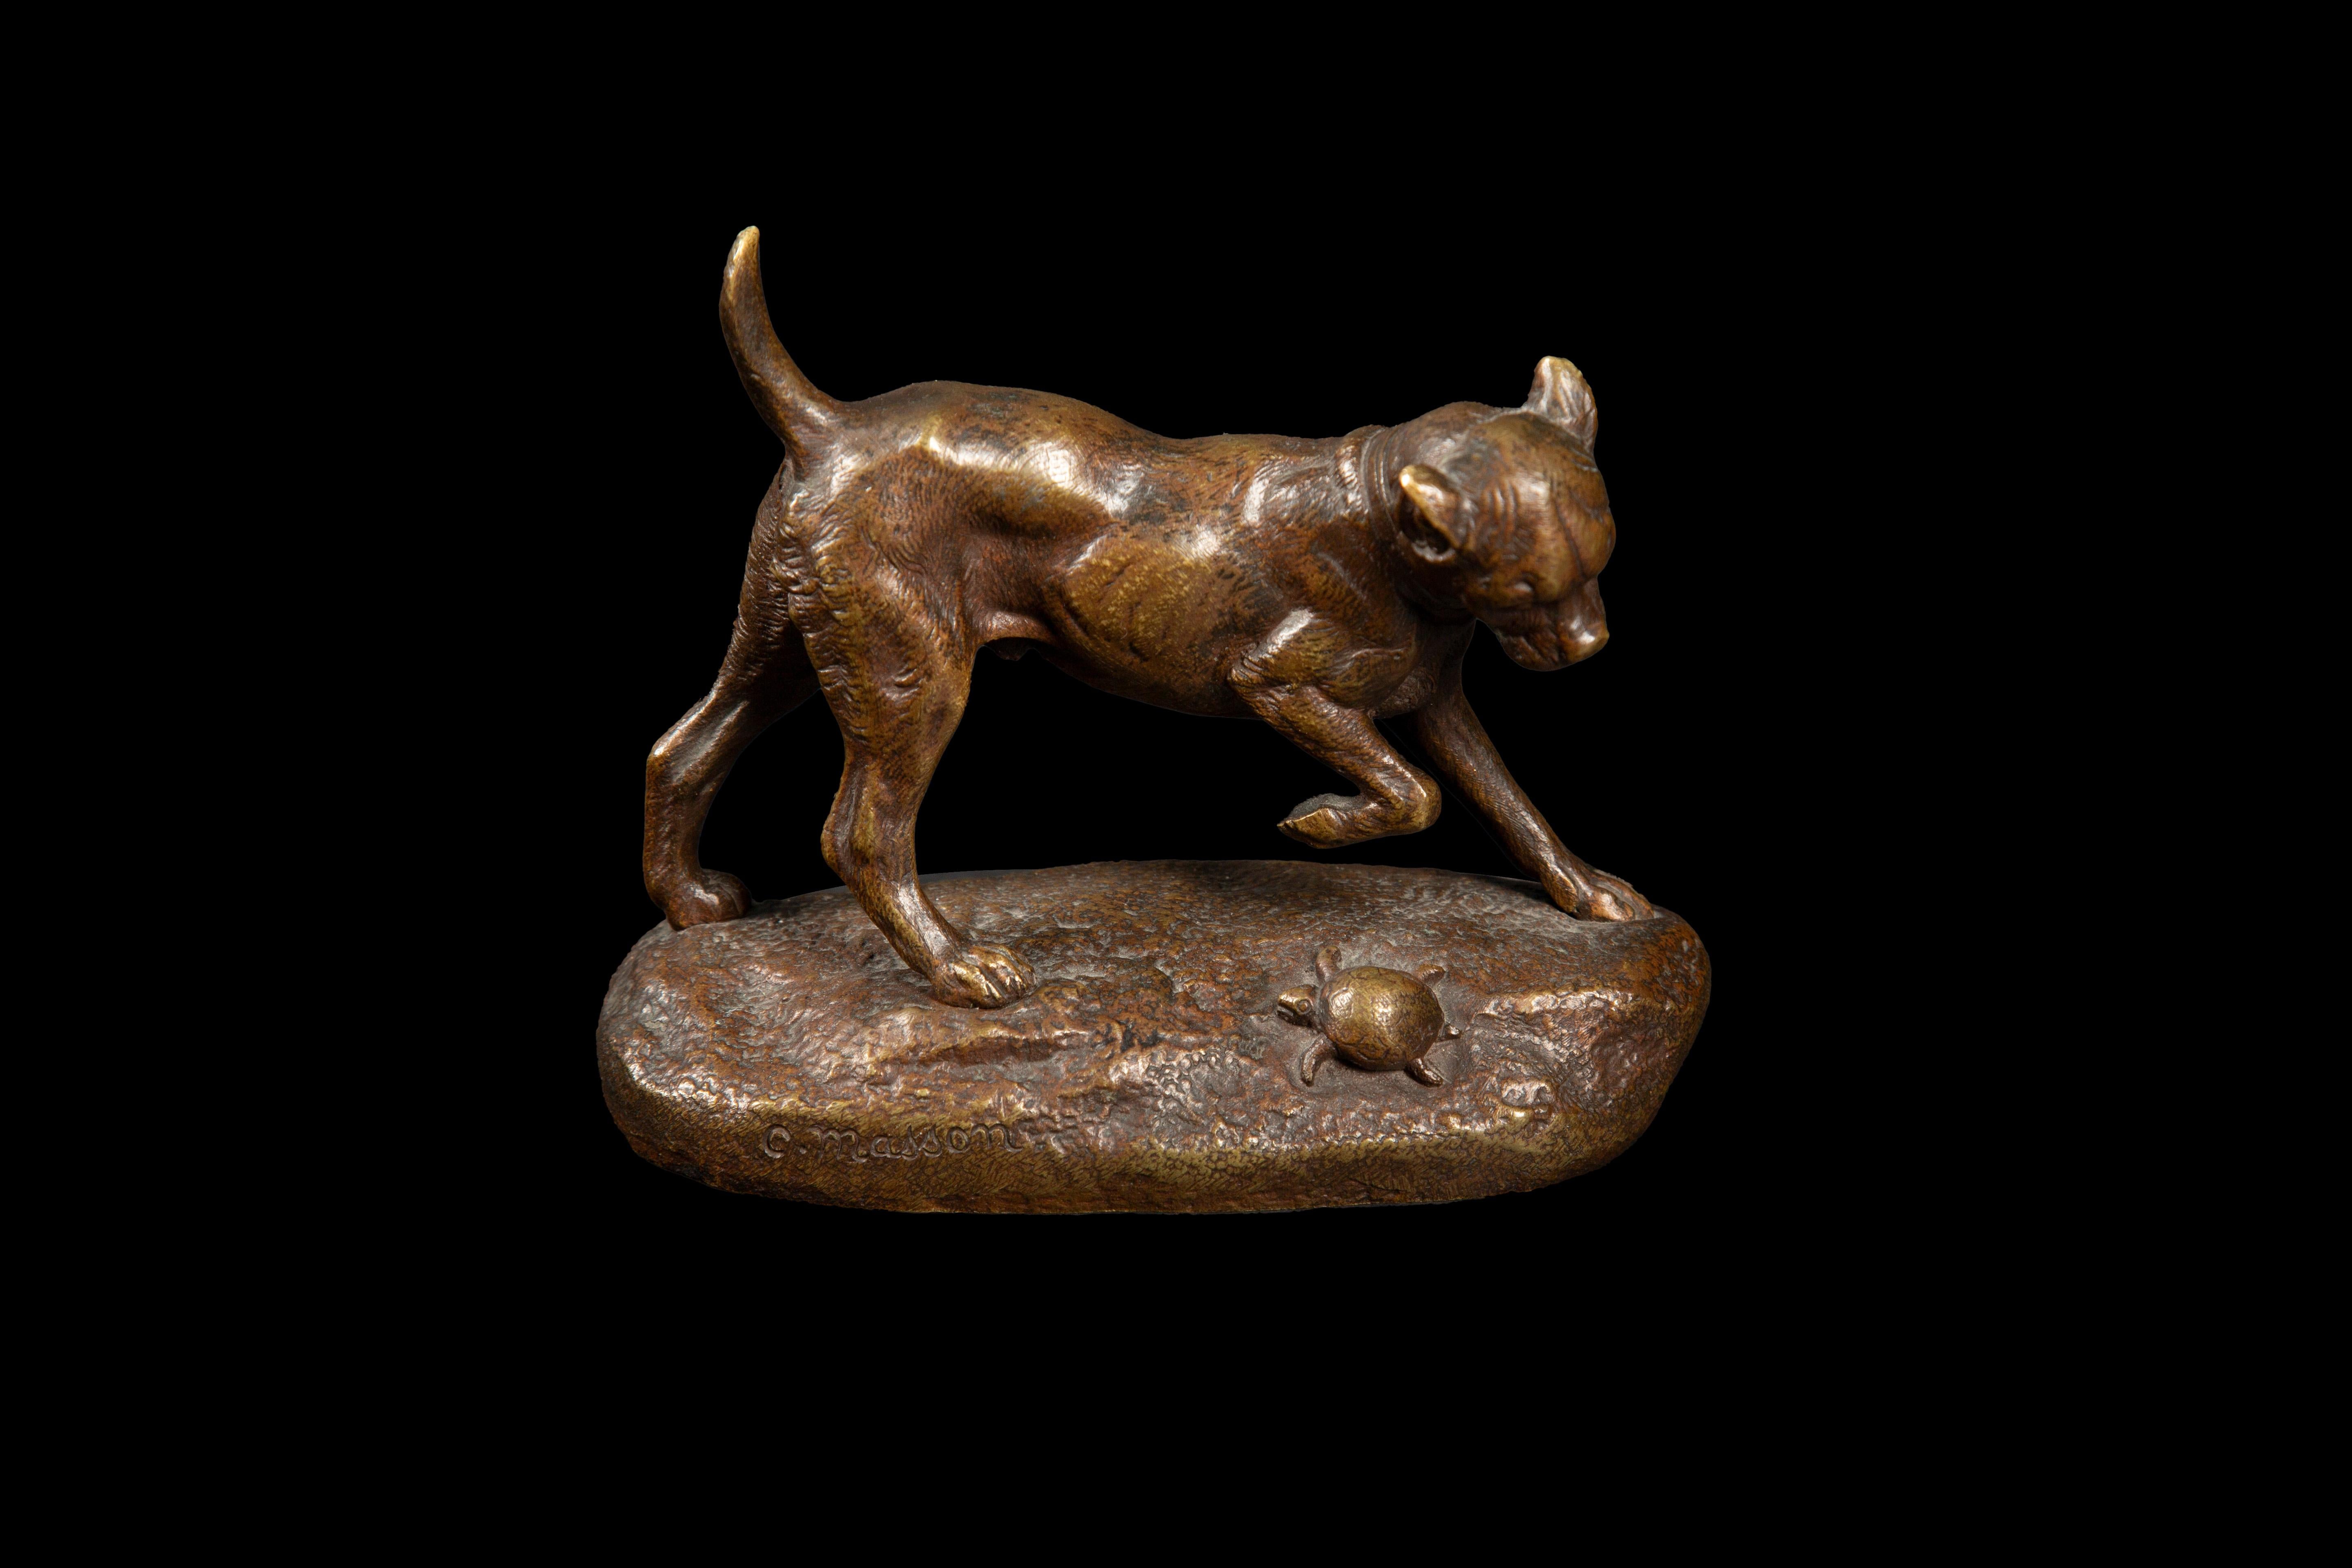 Captivating late 19th-century bronze sculpture crafted by the skilled hands of Clovis Edmond Masson (1838-1917), depicting a charming scene of a dog engaged in playful interaction with a turtle, signed C. Masson. Born and bred in Paris, Masson honed